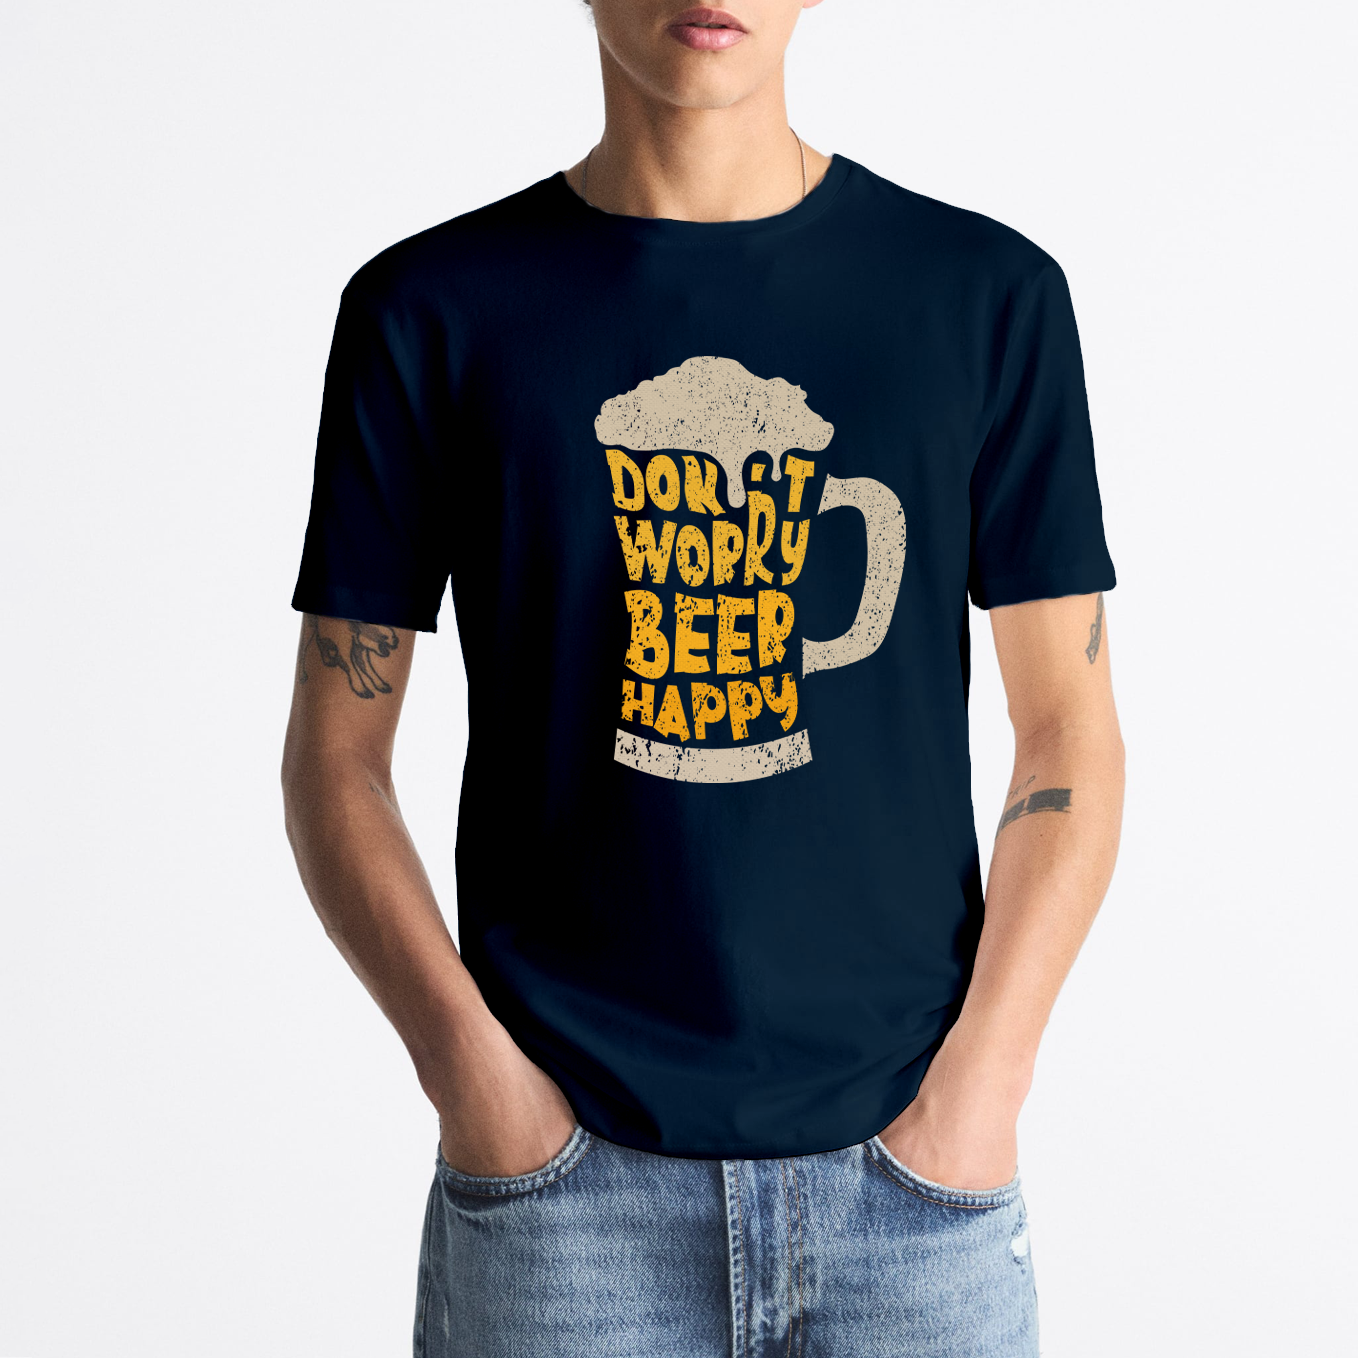 T-shirt "Don't worry Beer happy"